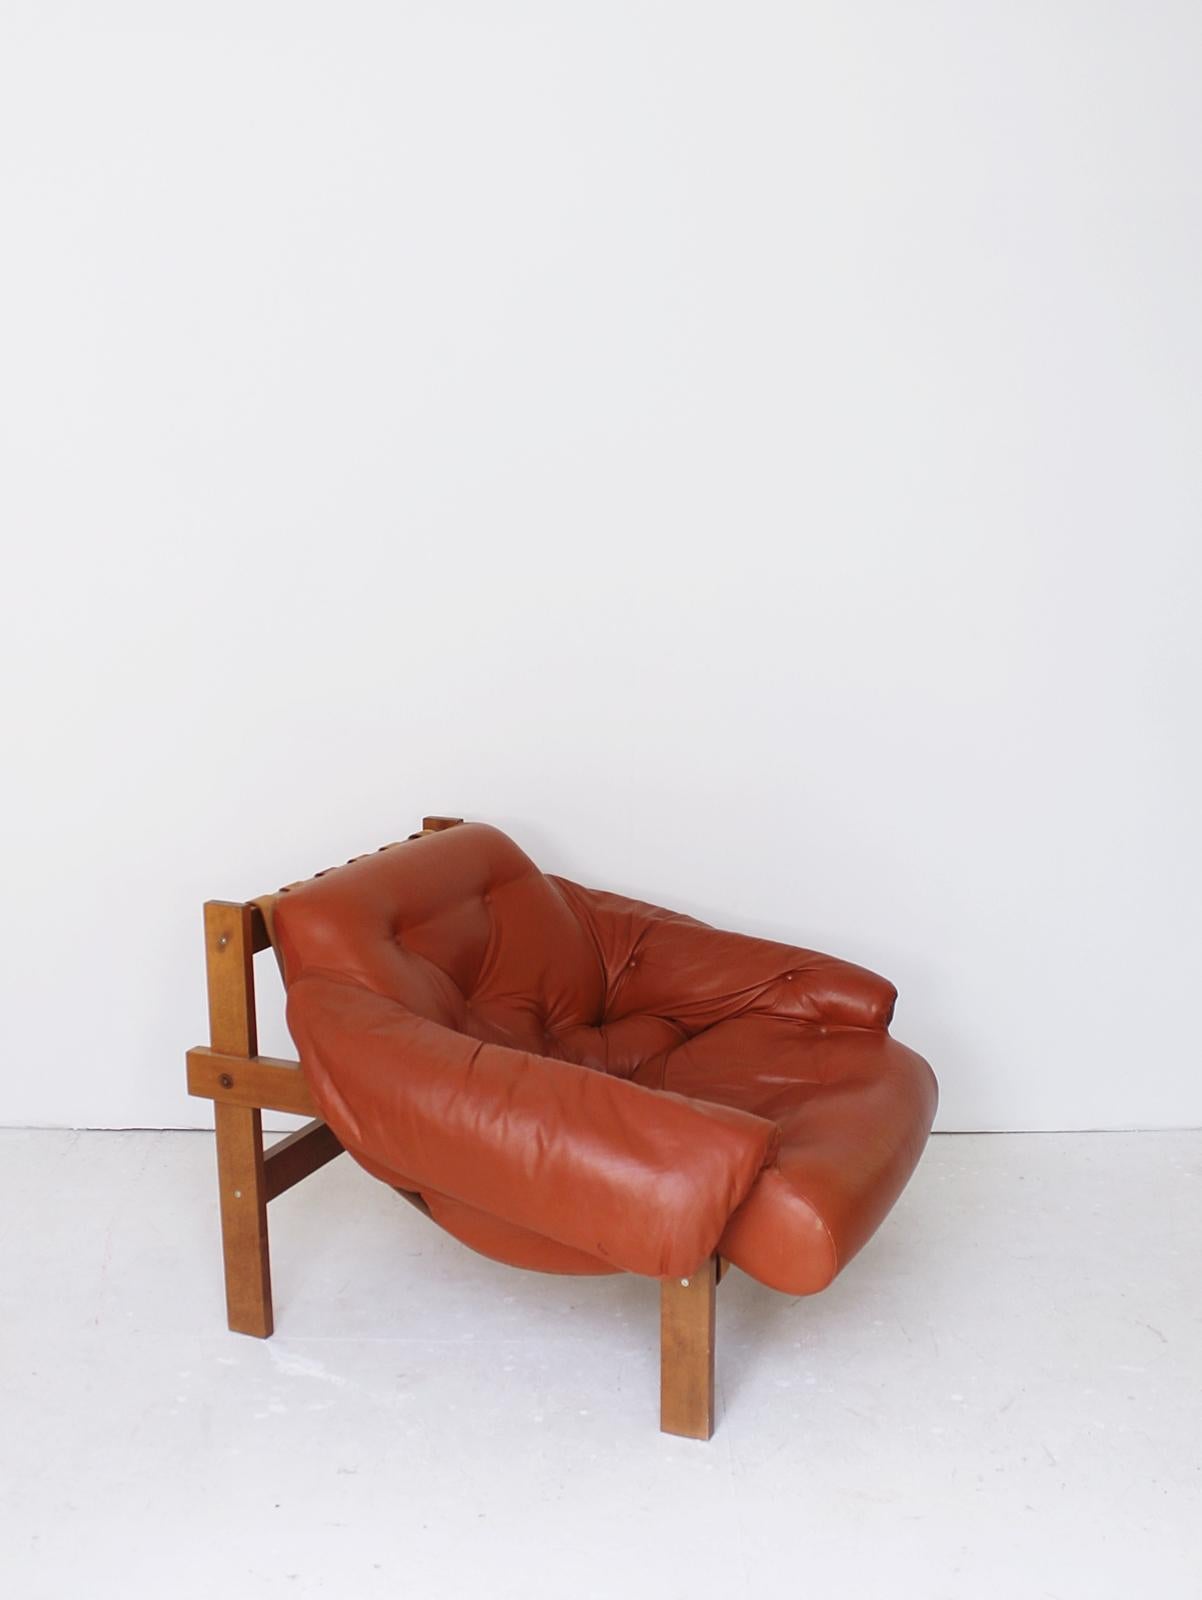  Stunning  leather armchair in manner of Brazilian designer Percival Lafer. 
Featuring a solid wood frame with beautiful grain that supports the natural leather straps which the tufted  leather cushion rests on. 
The original leather upholstery in